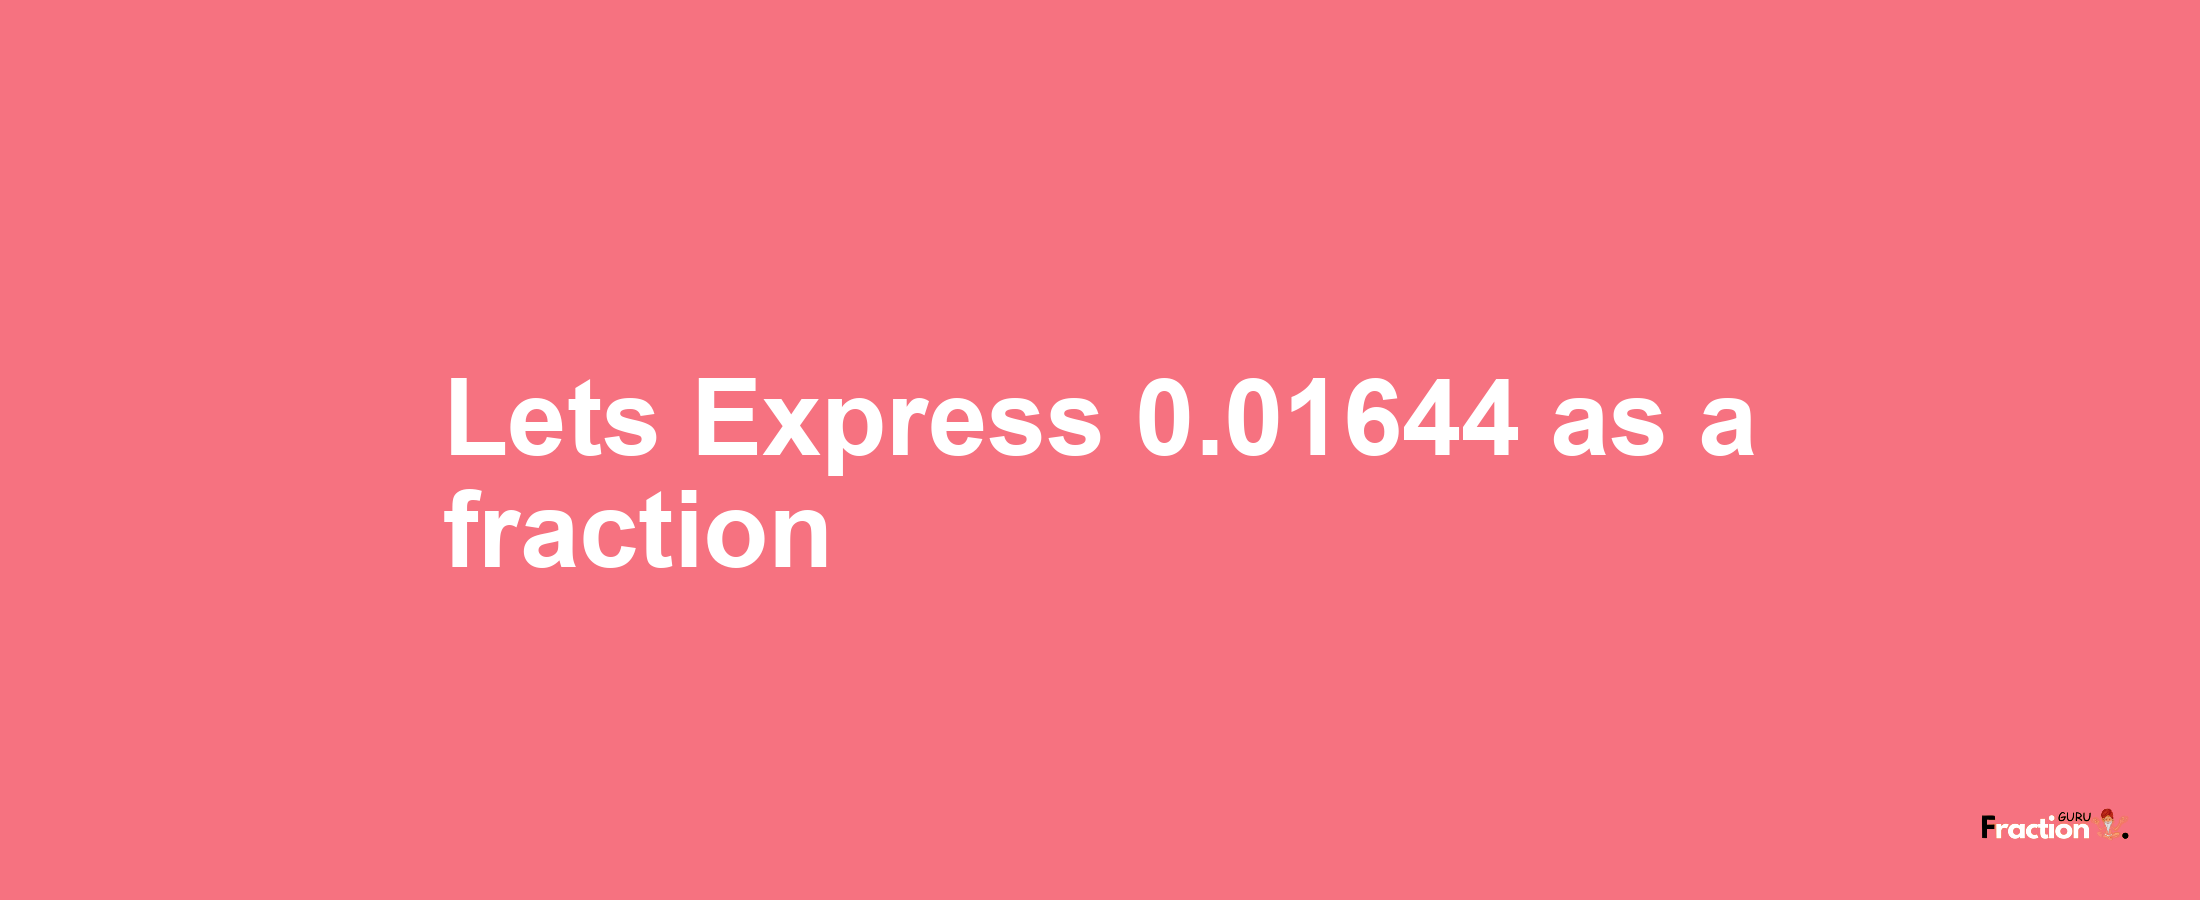 Lets Express 0.01644 as afraction